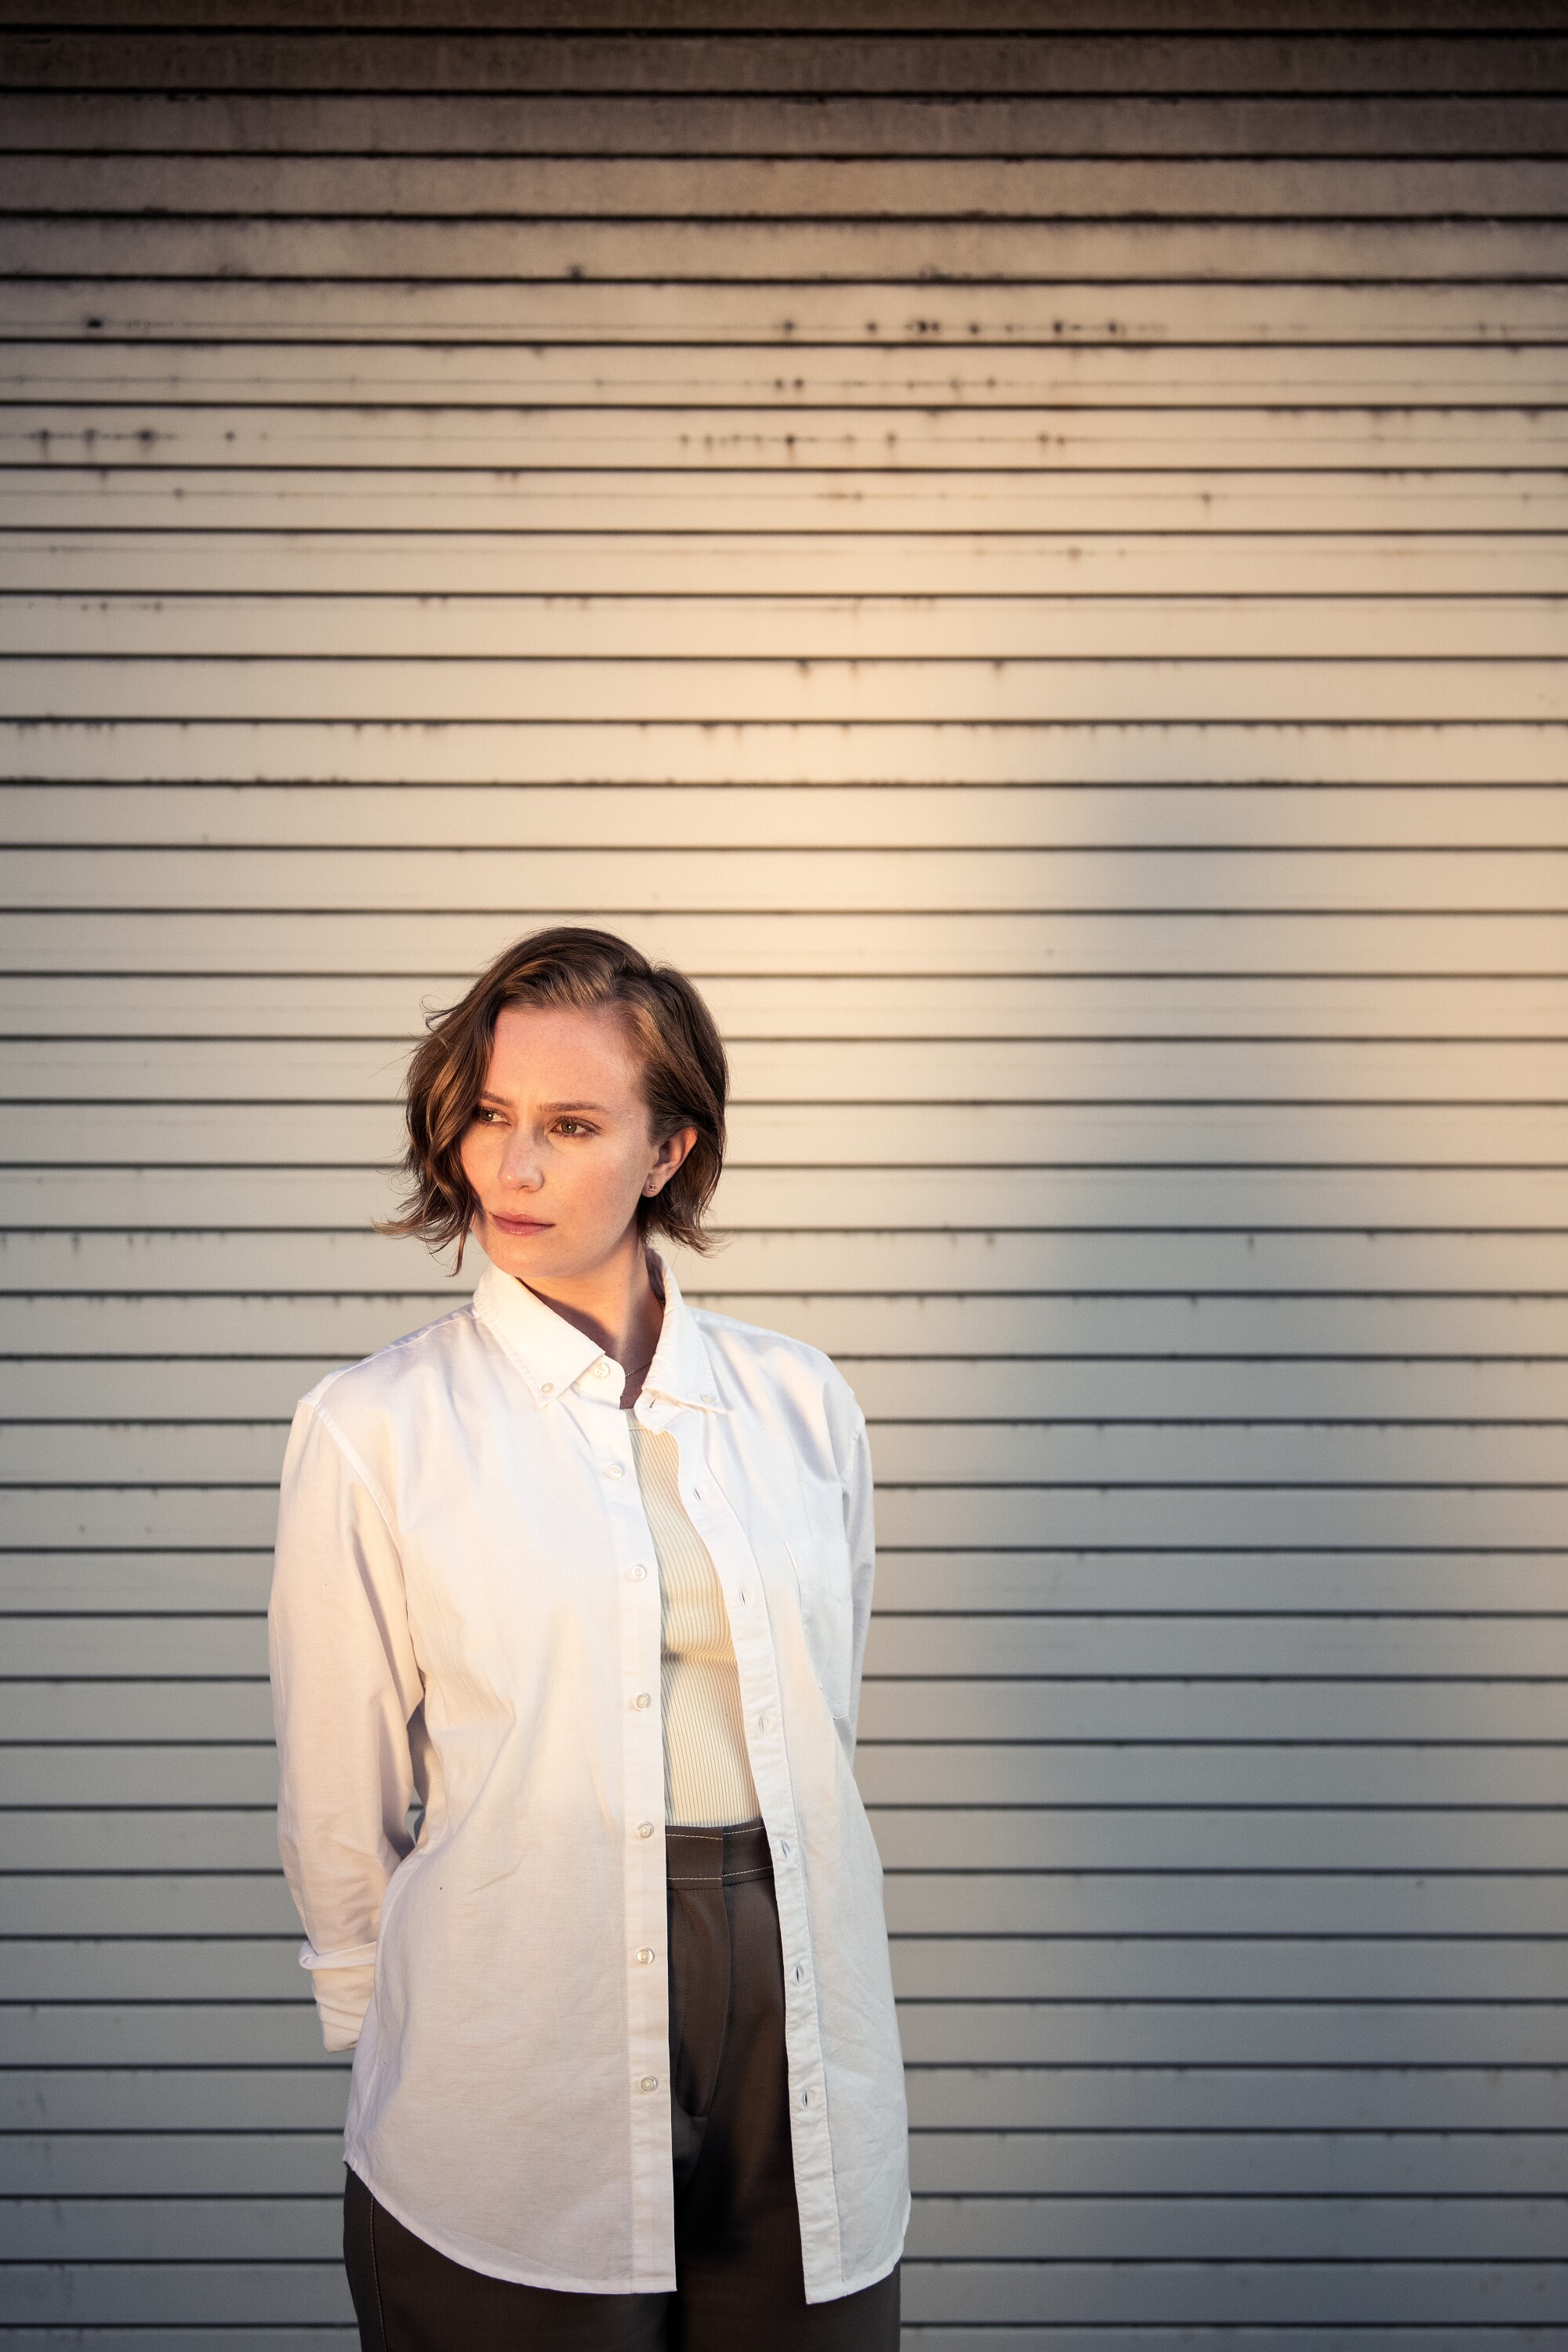 A woman poses for her portrait in front of a slatted wall.